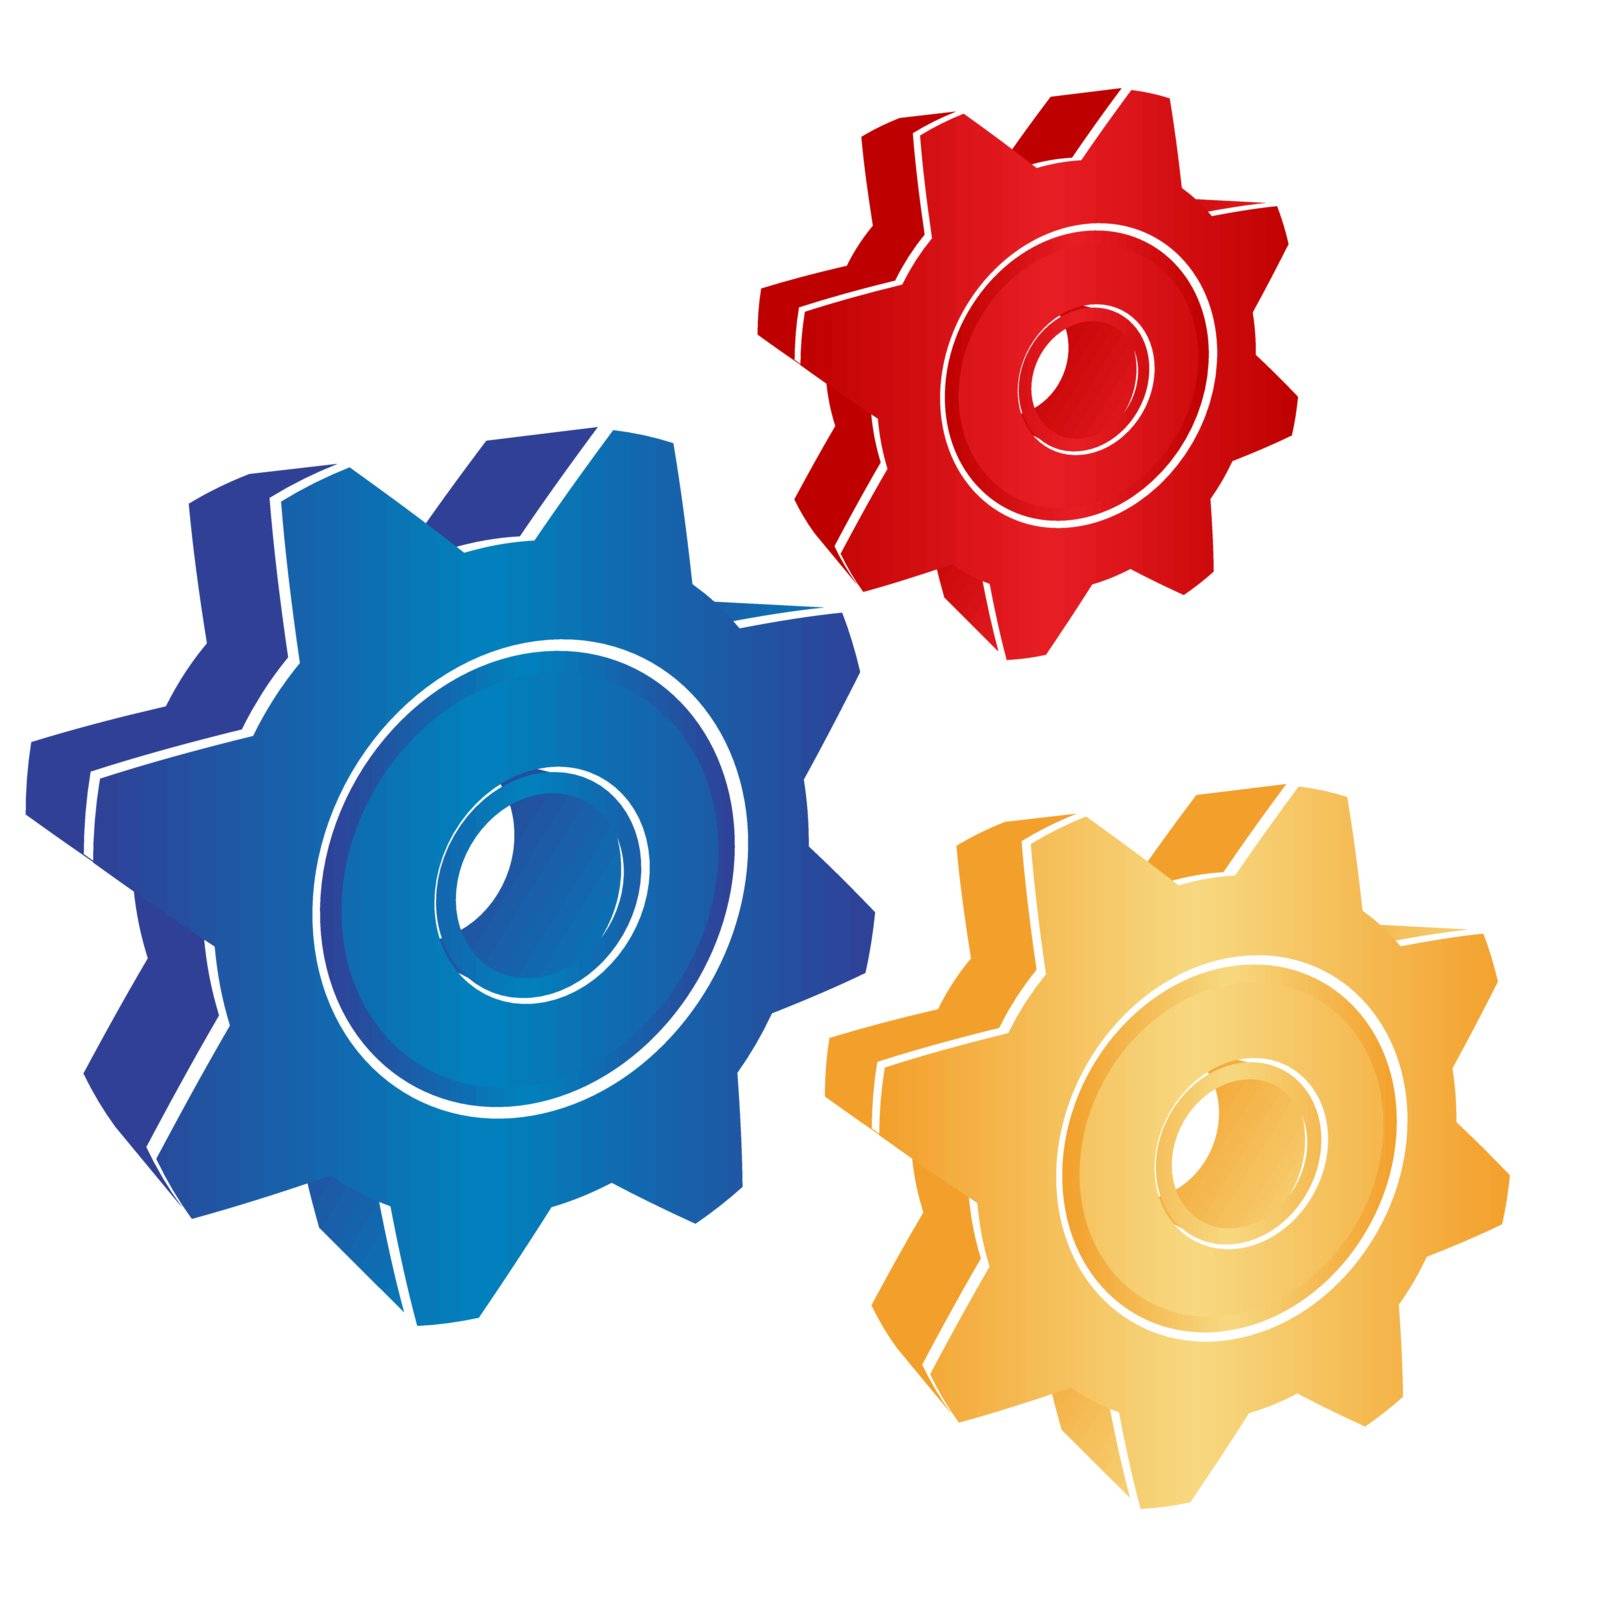 3D Gears over white background